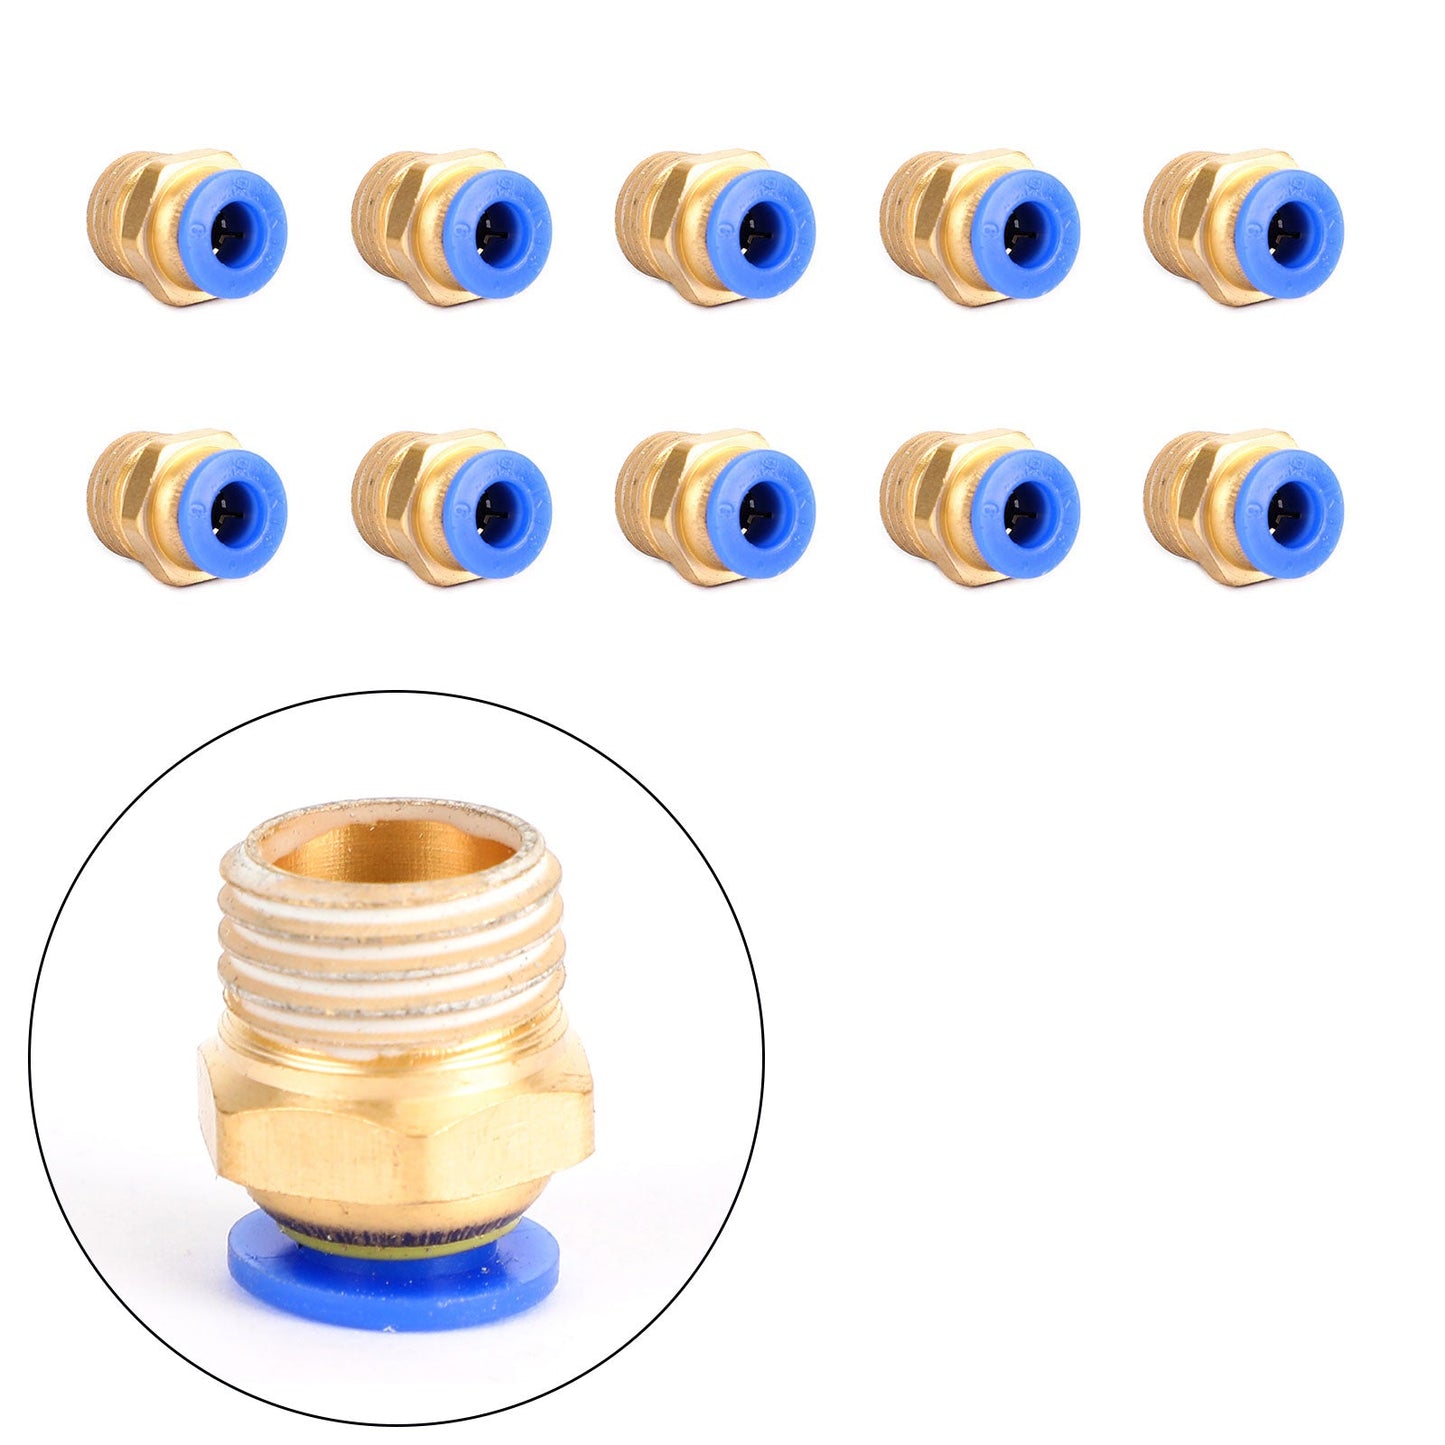 10x Pneumatic 1/4" Tube X 1/8" NPT Male Connector Push In To Air Connect Fitting